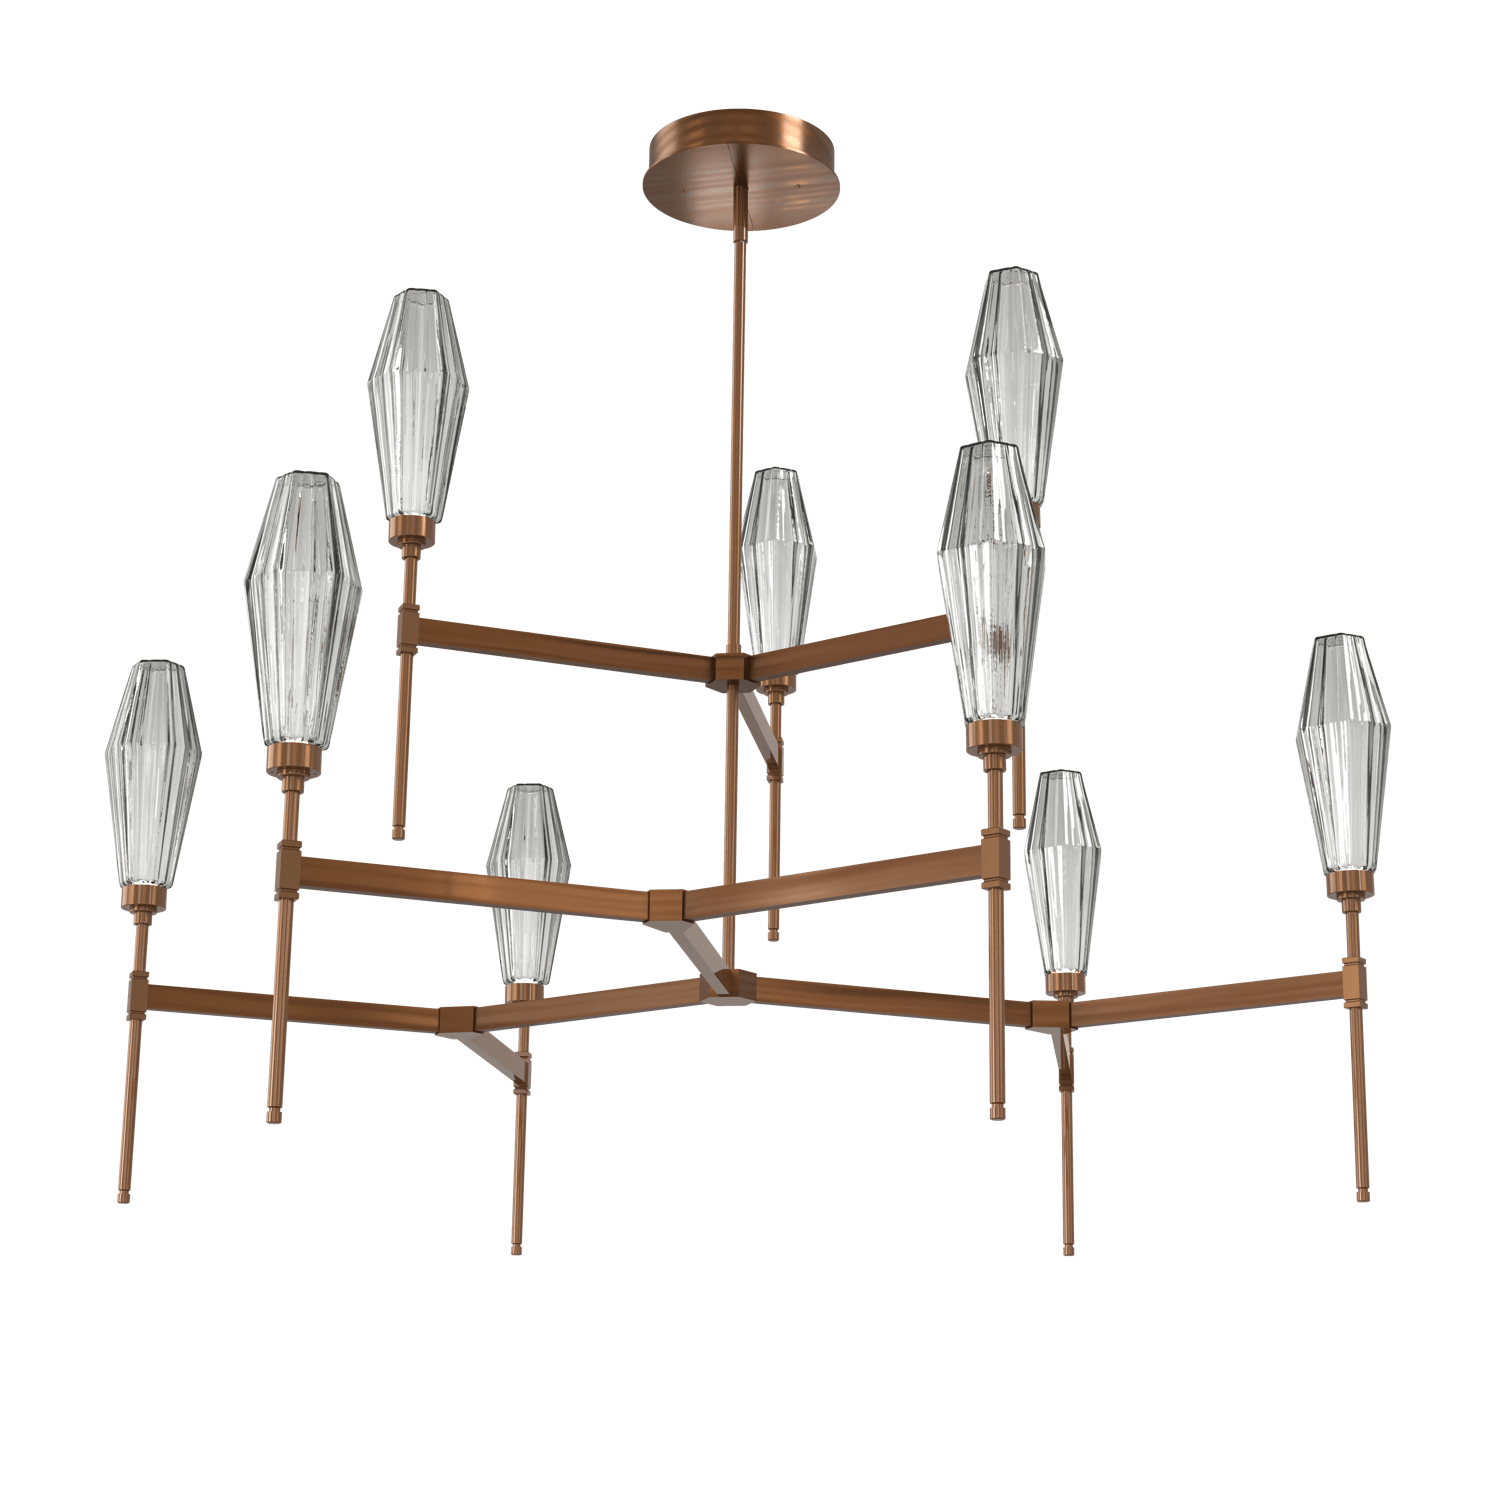 CHB0049-54-RB-RS-Hammerton-Studio-Aalto-54-inch-round-two-tier-belvedere-chandelier-with-oil-rubbed-bronze-finish-and-optic-ribbed-smoke-glass-shades-and-LED-lamping